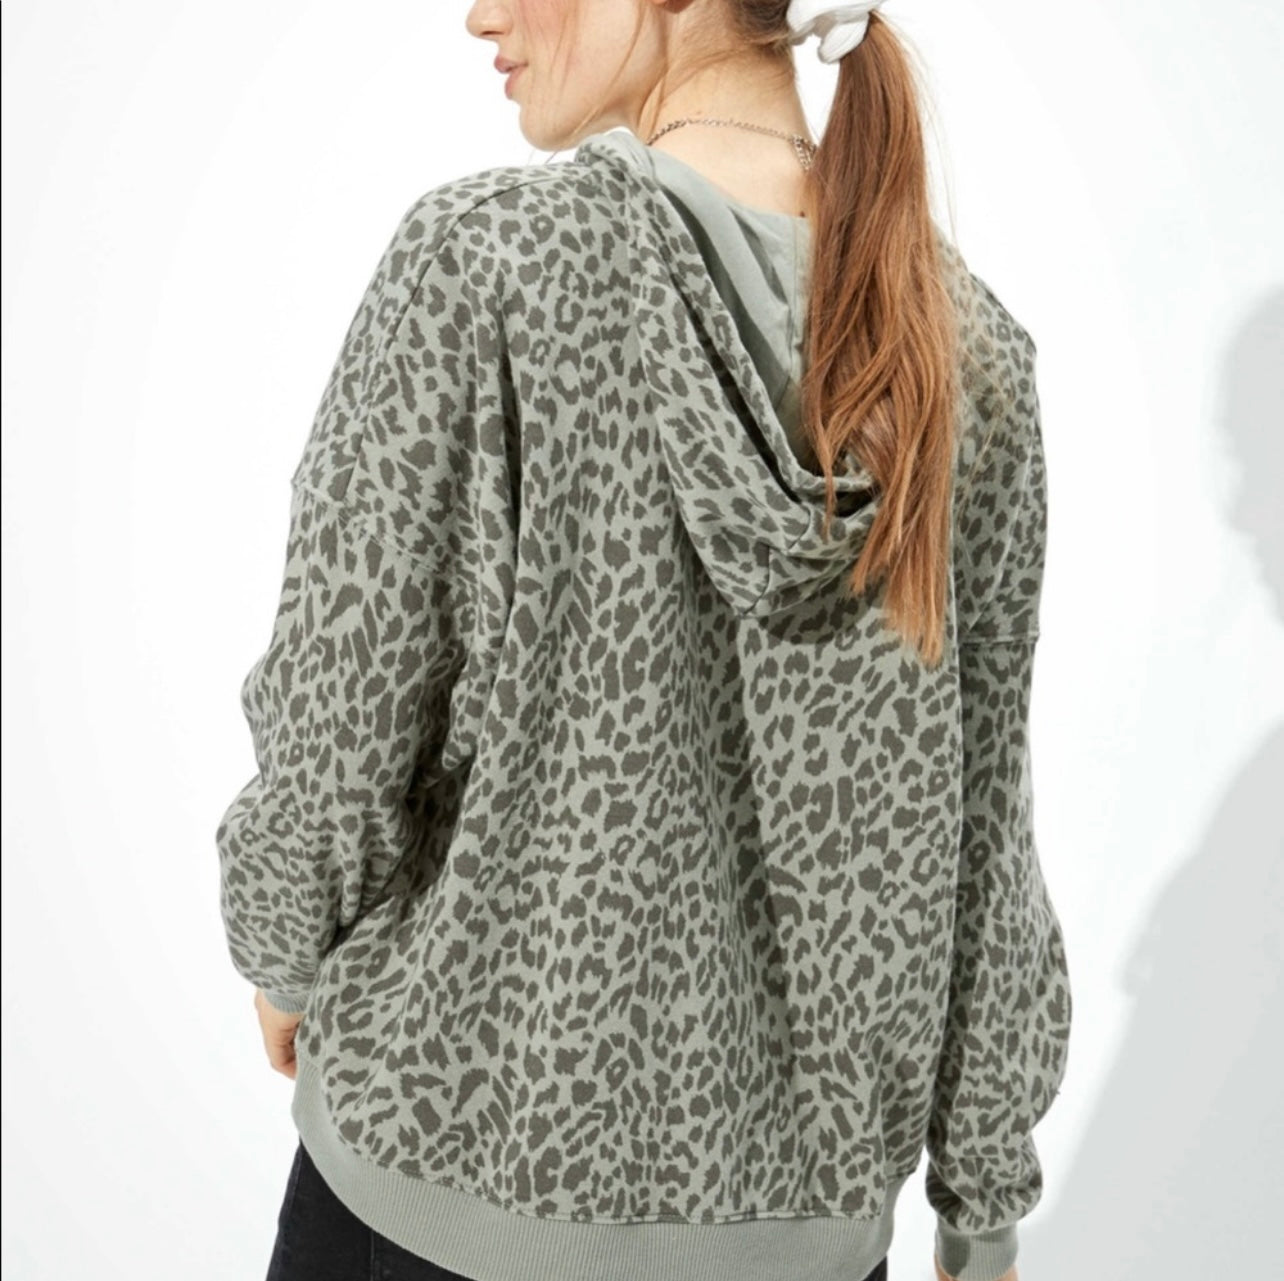 Olive Green Leopard Pullover - Size S/M